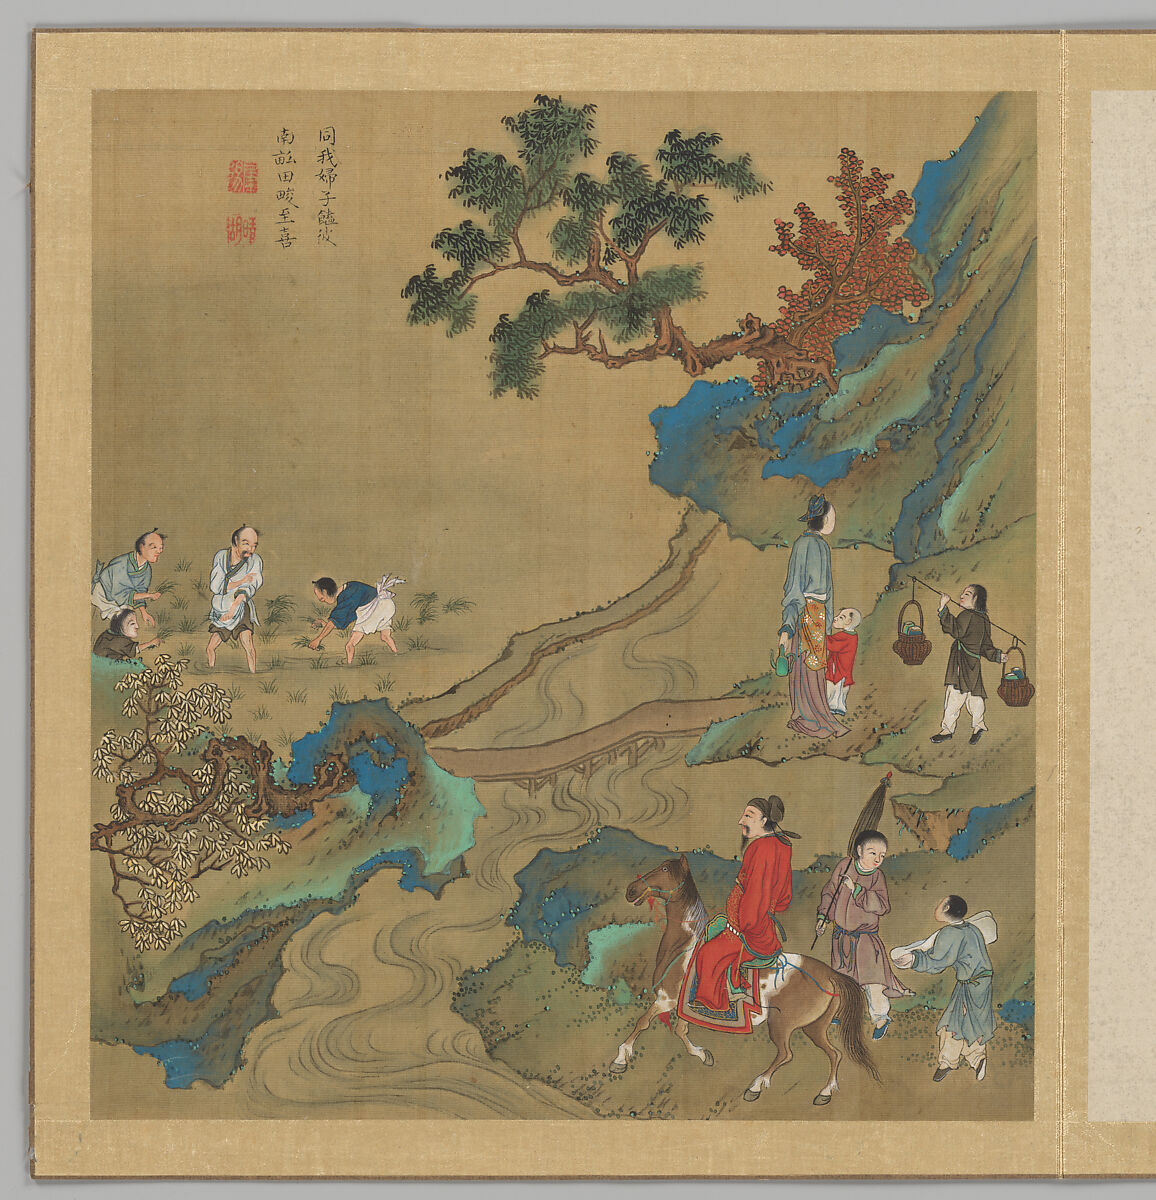 Odes of the State of Bin: The Seventh Month, Fei Qinghu (Fei Zhaoyang)  Chinese, Album of twenty leaves; ink and color on silk, China